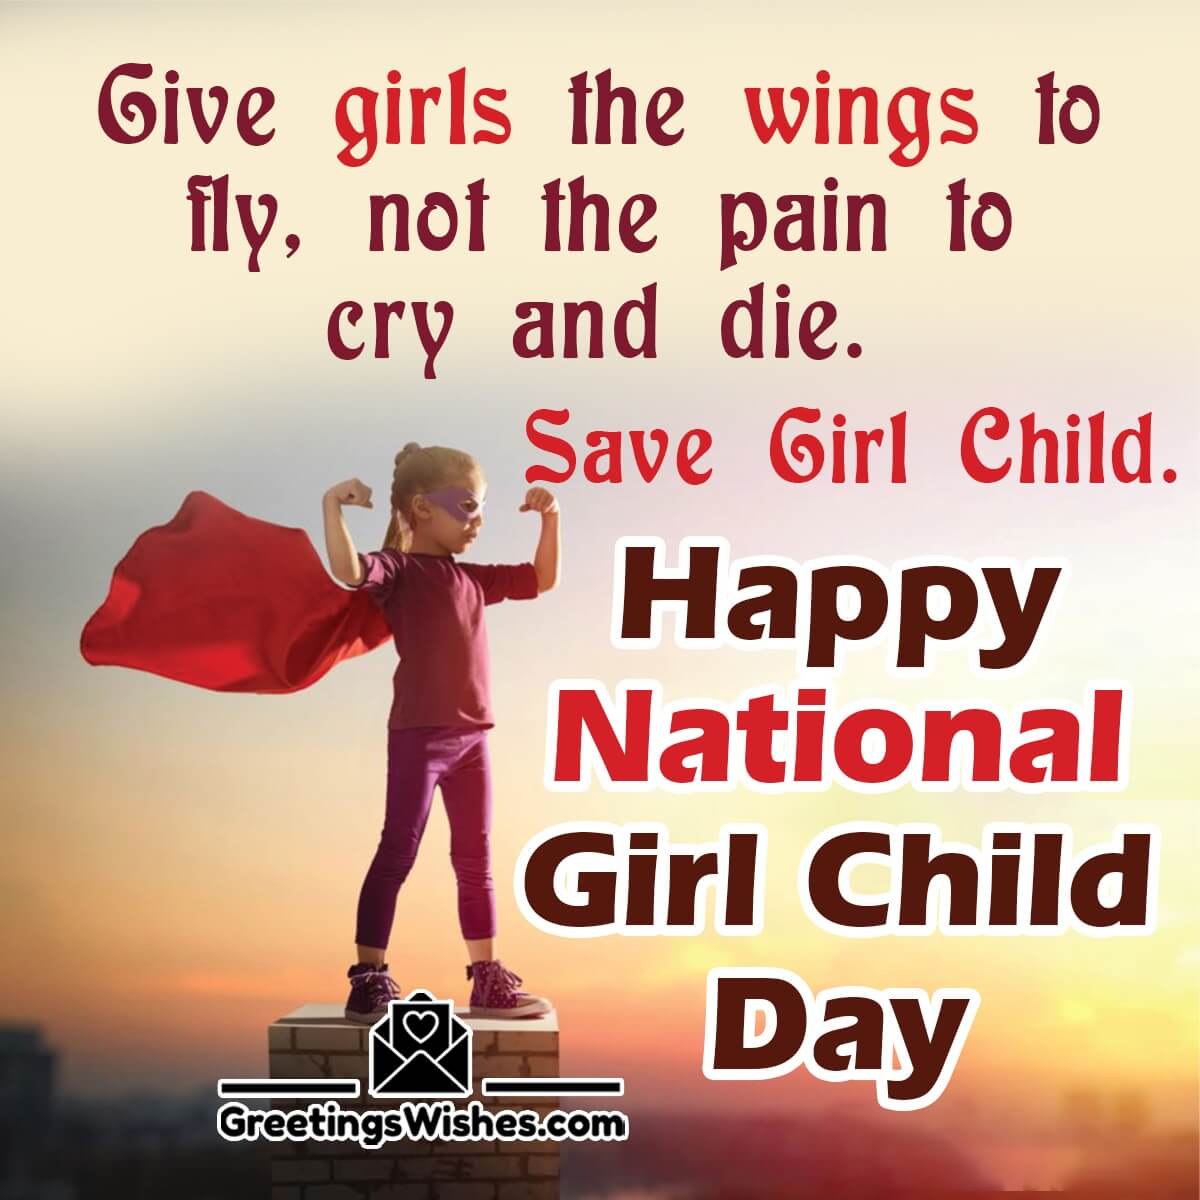 National Girl Child Day Wishes, Messages  (24th January)